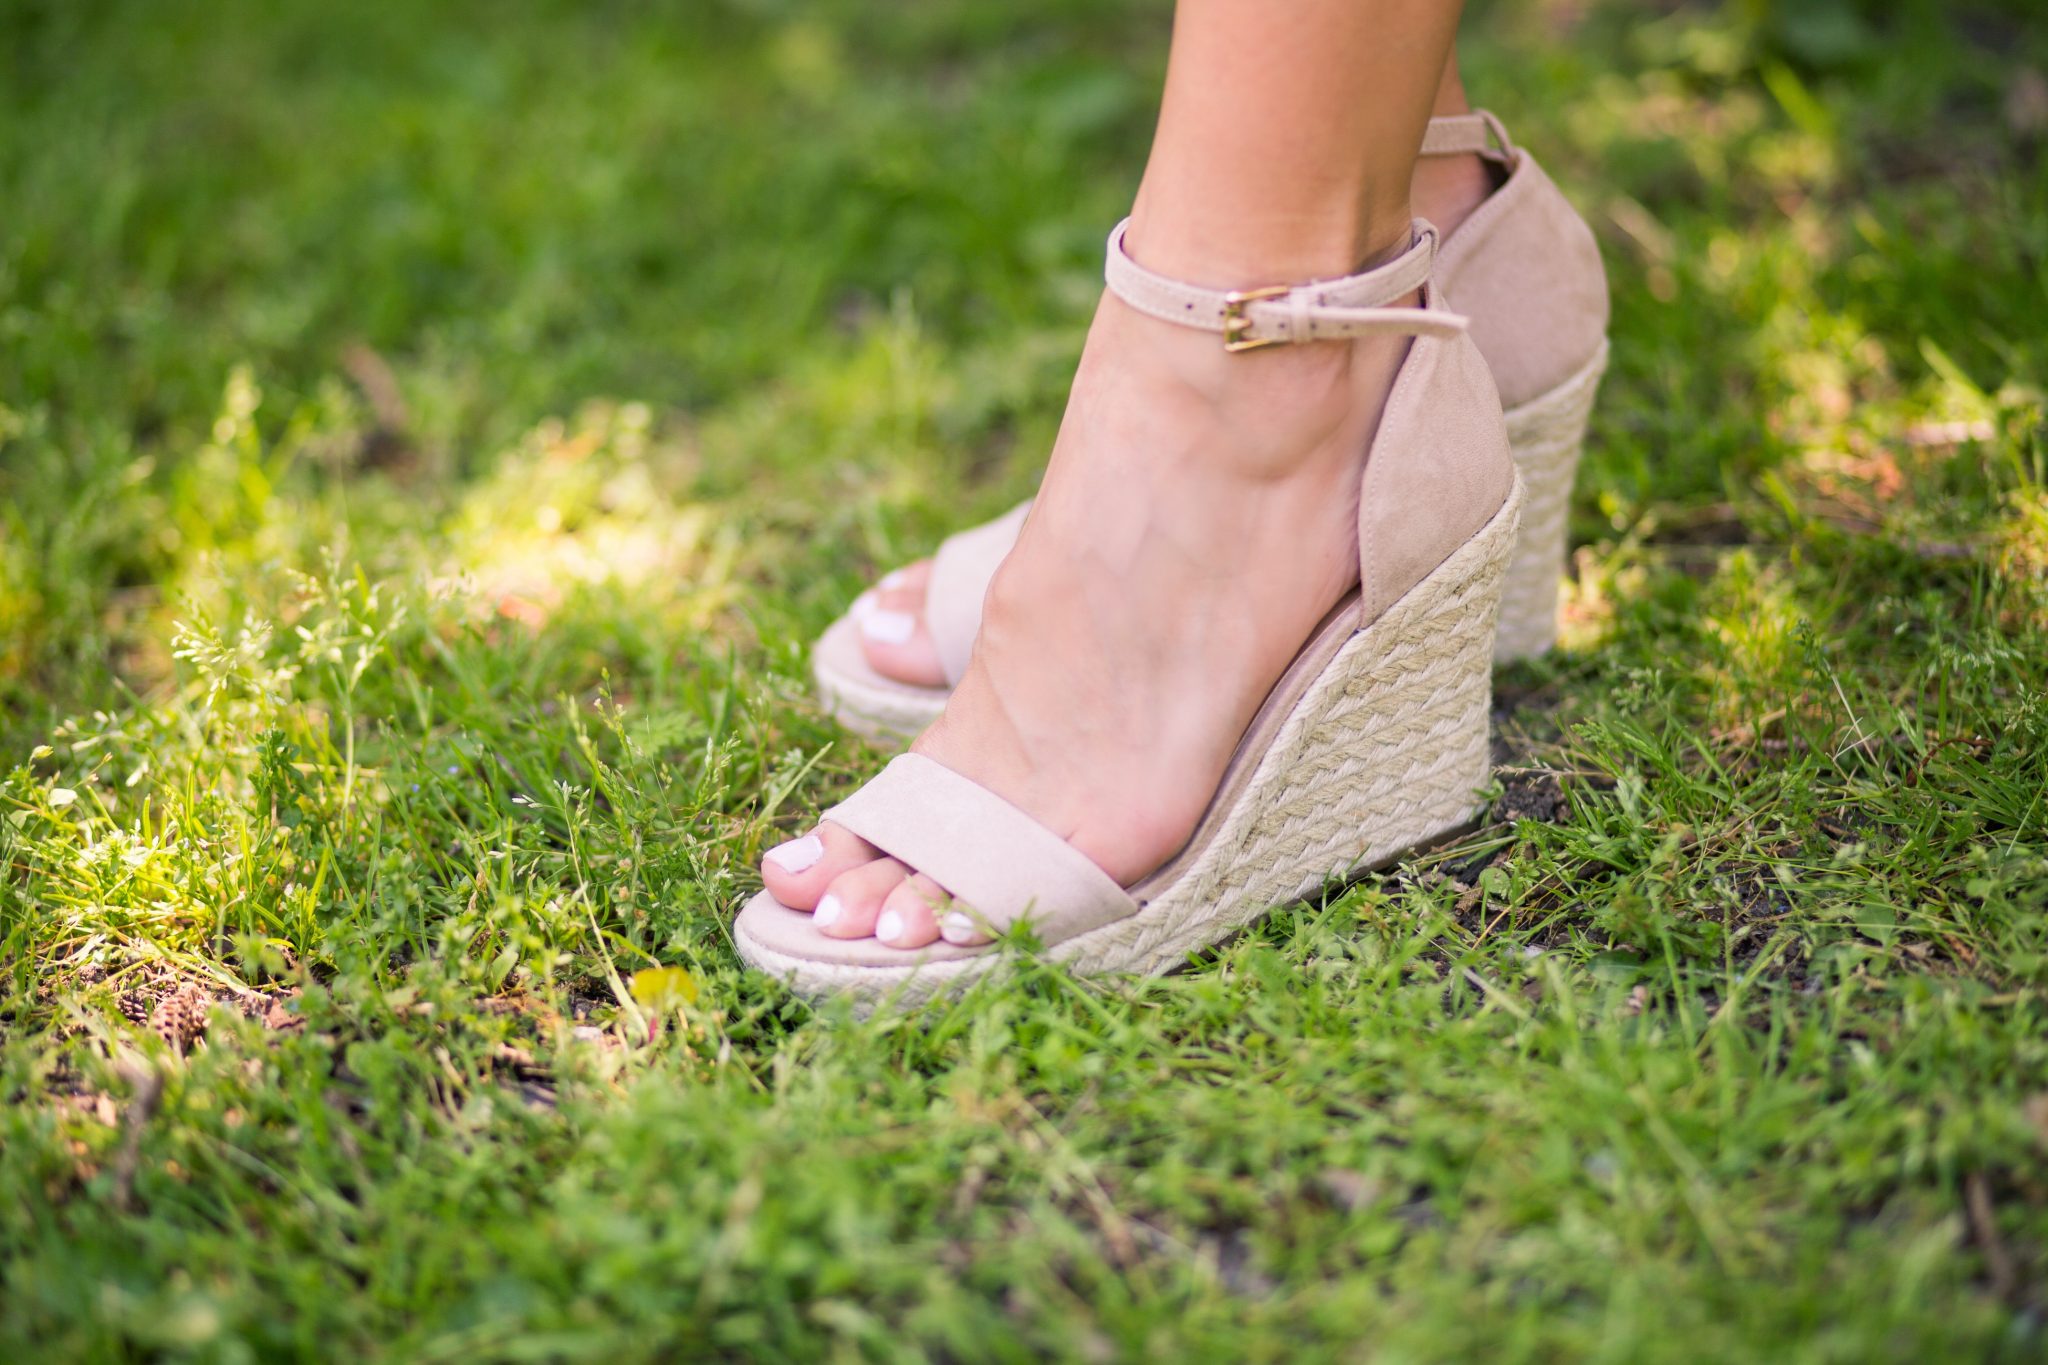 Pink clutch and wedge sandals from Le Chateau